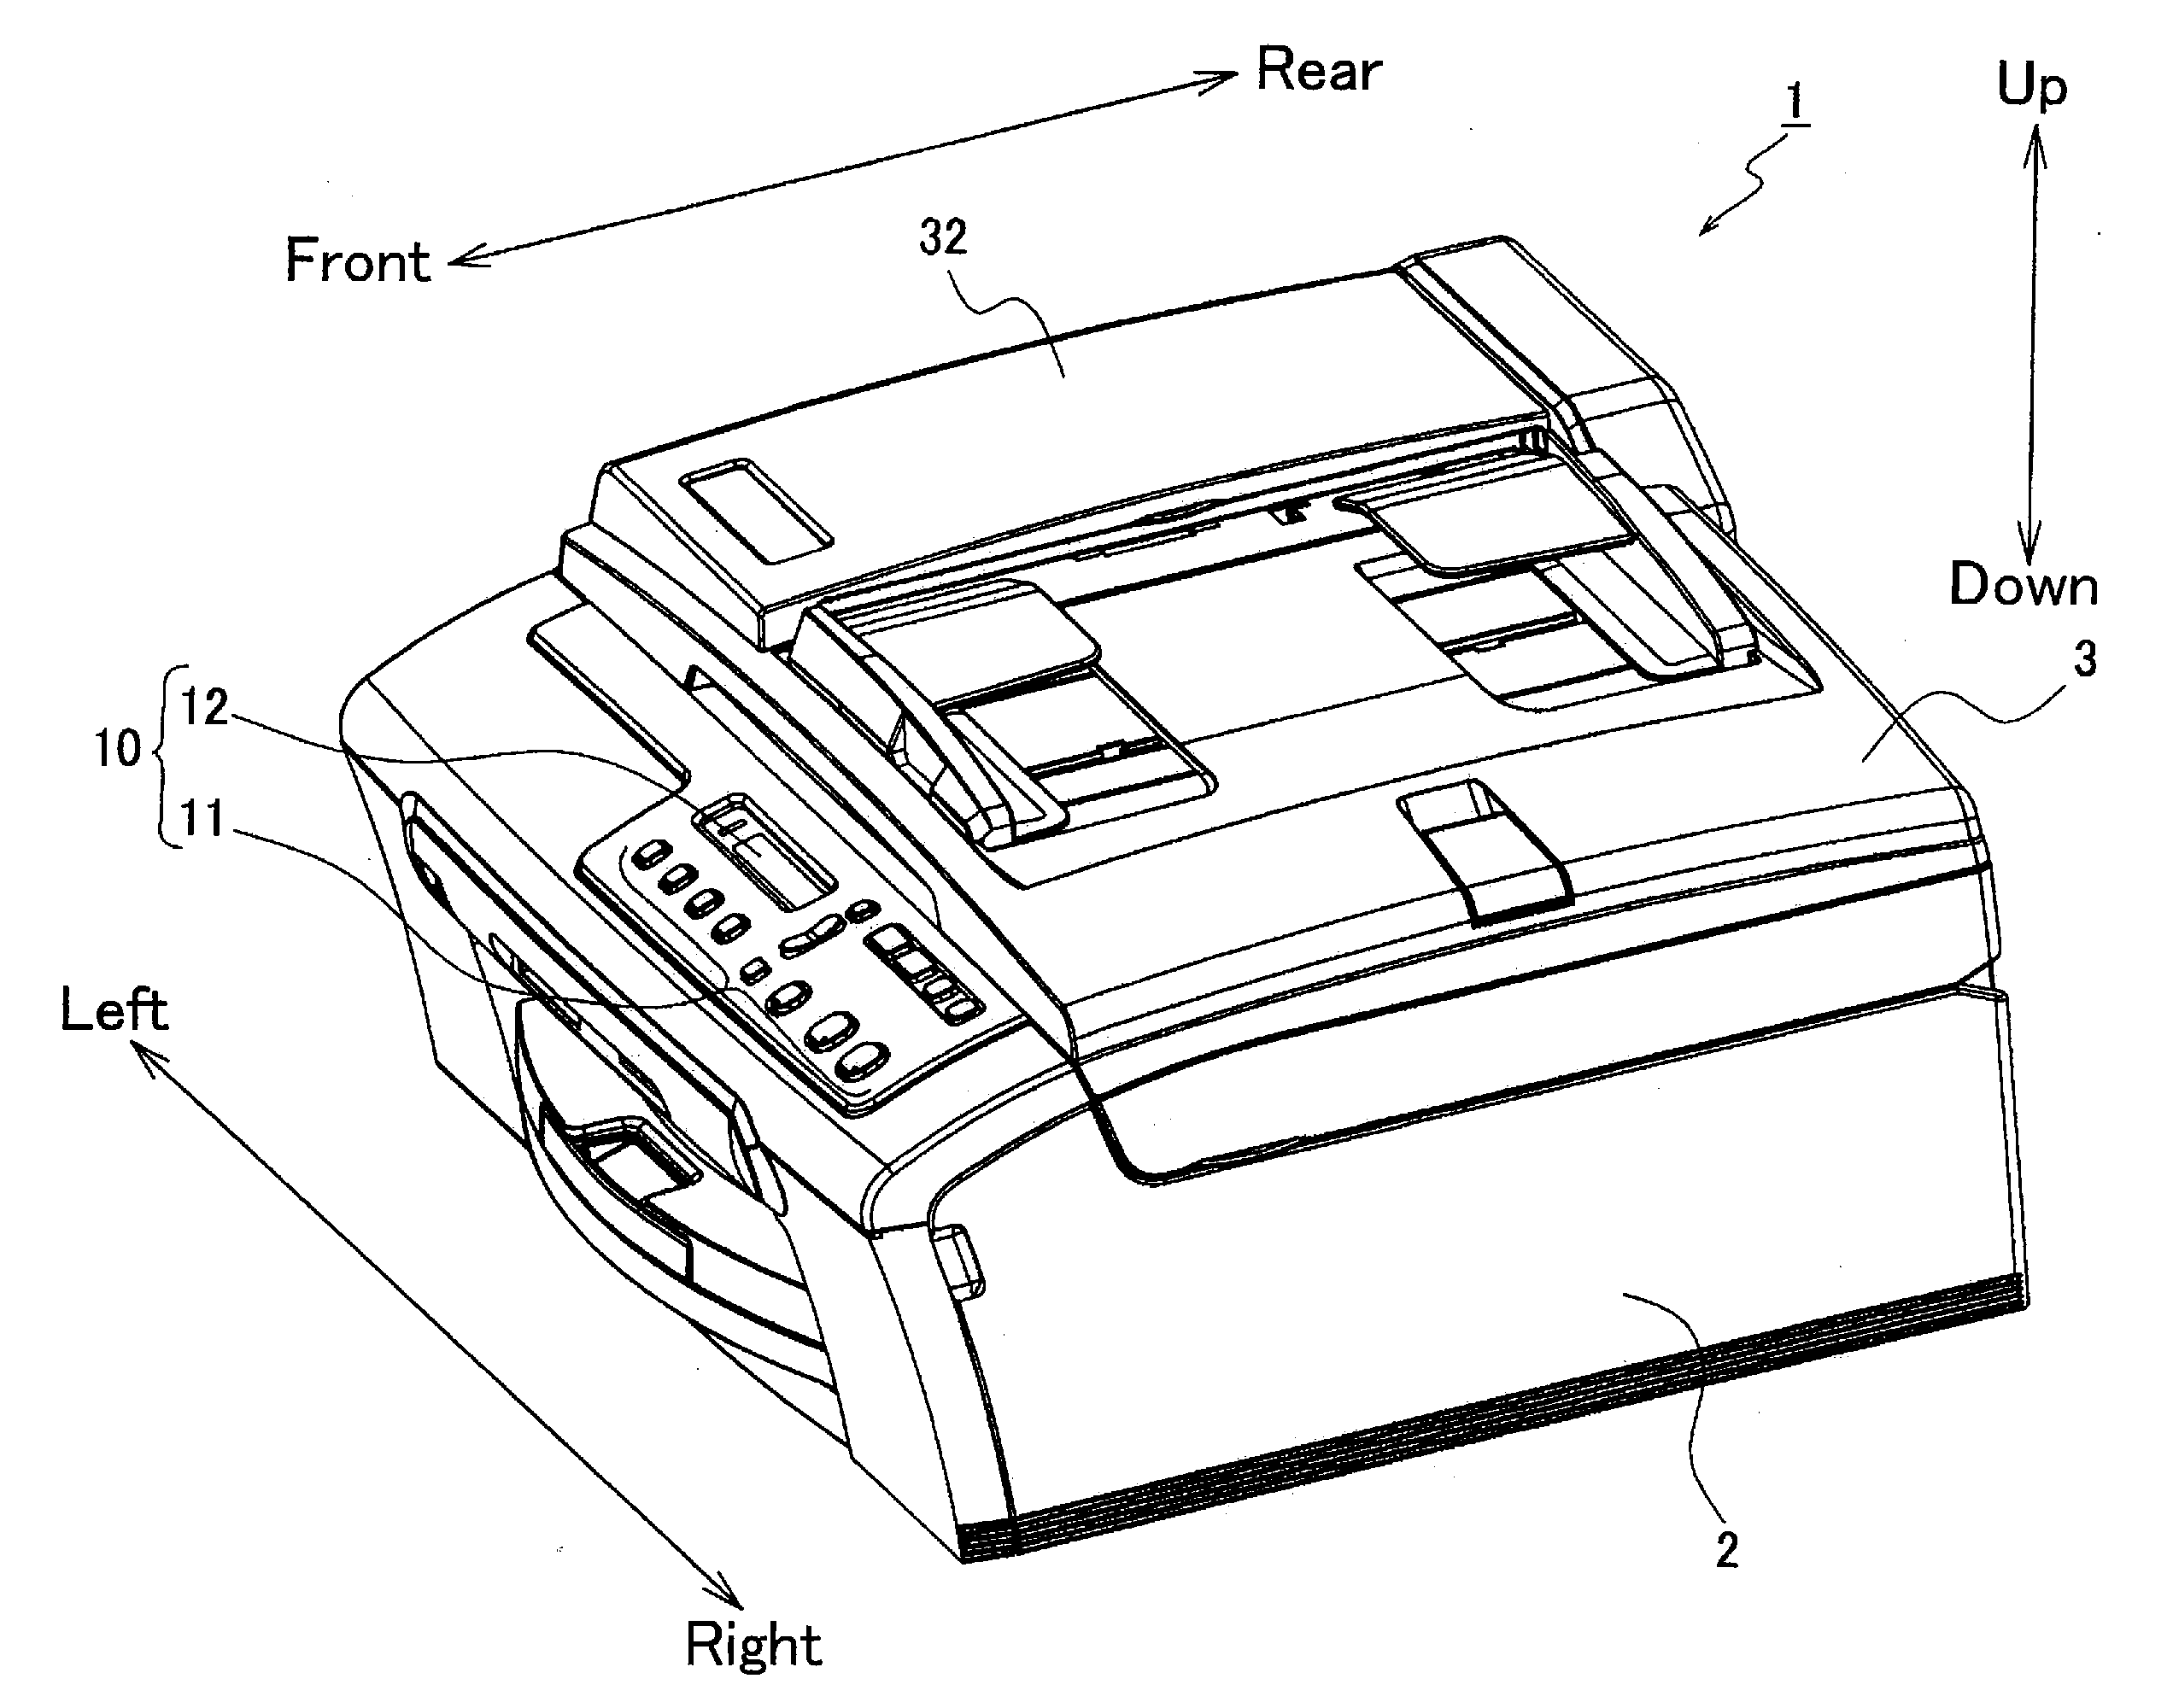 Driving device and scanner